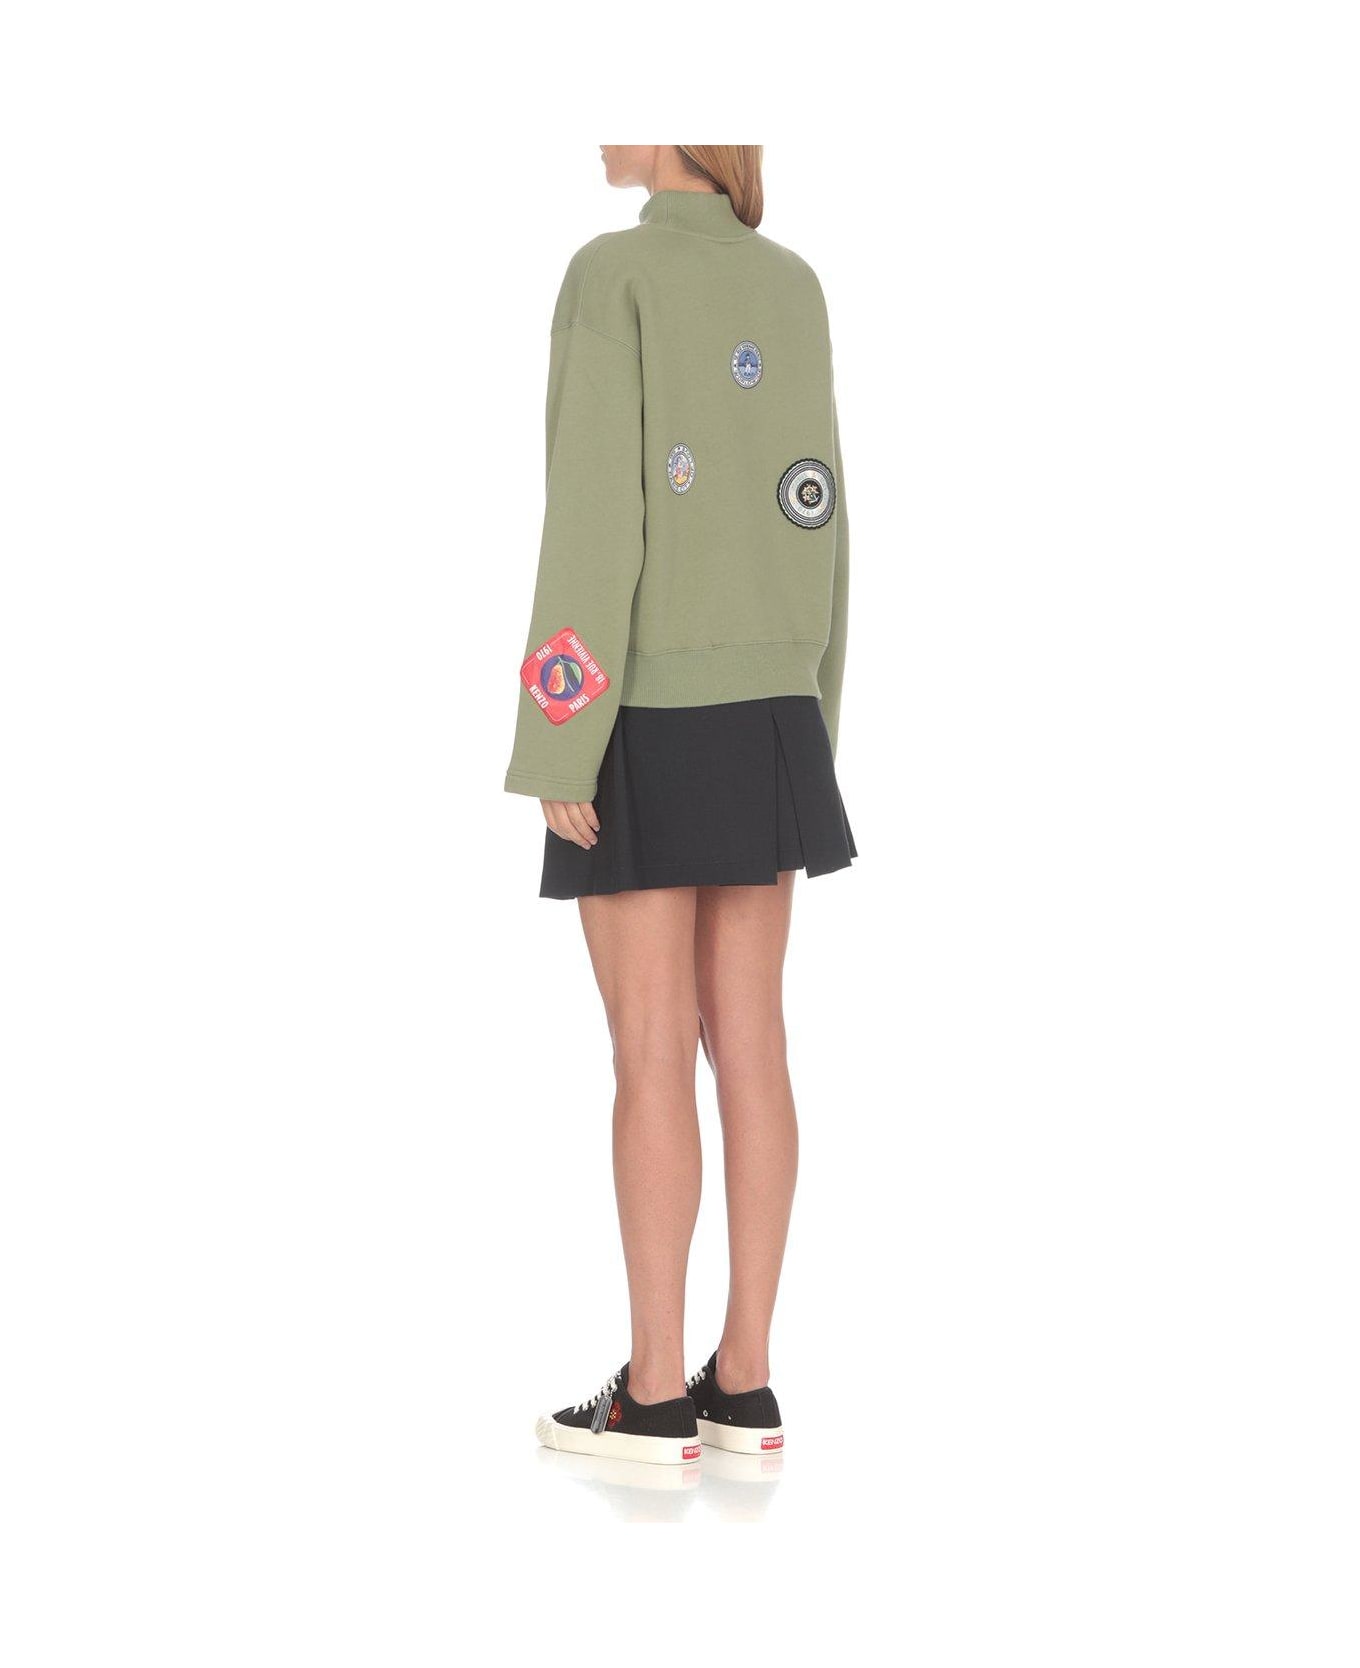 Kenzo Badges Patch Knitted High-neck Sweatshirt - Green